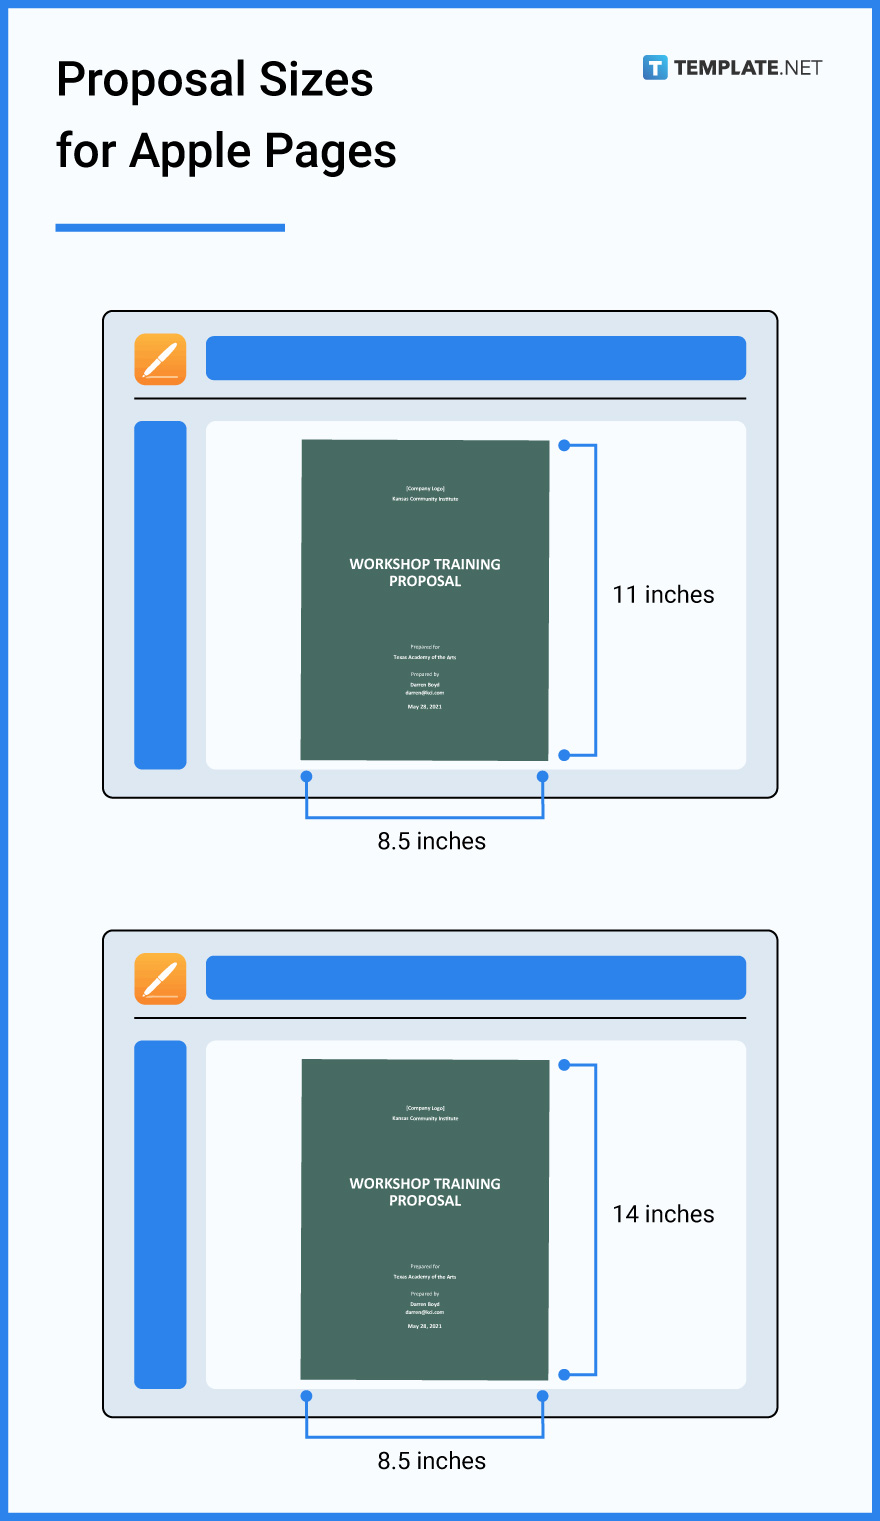 proposal-sizes-for-apple-pages